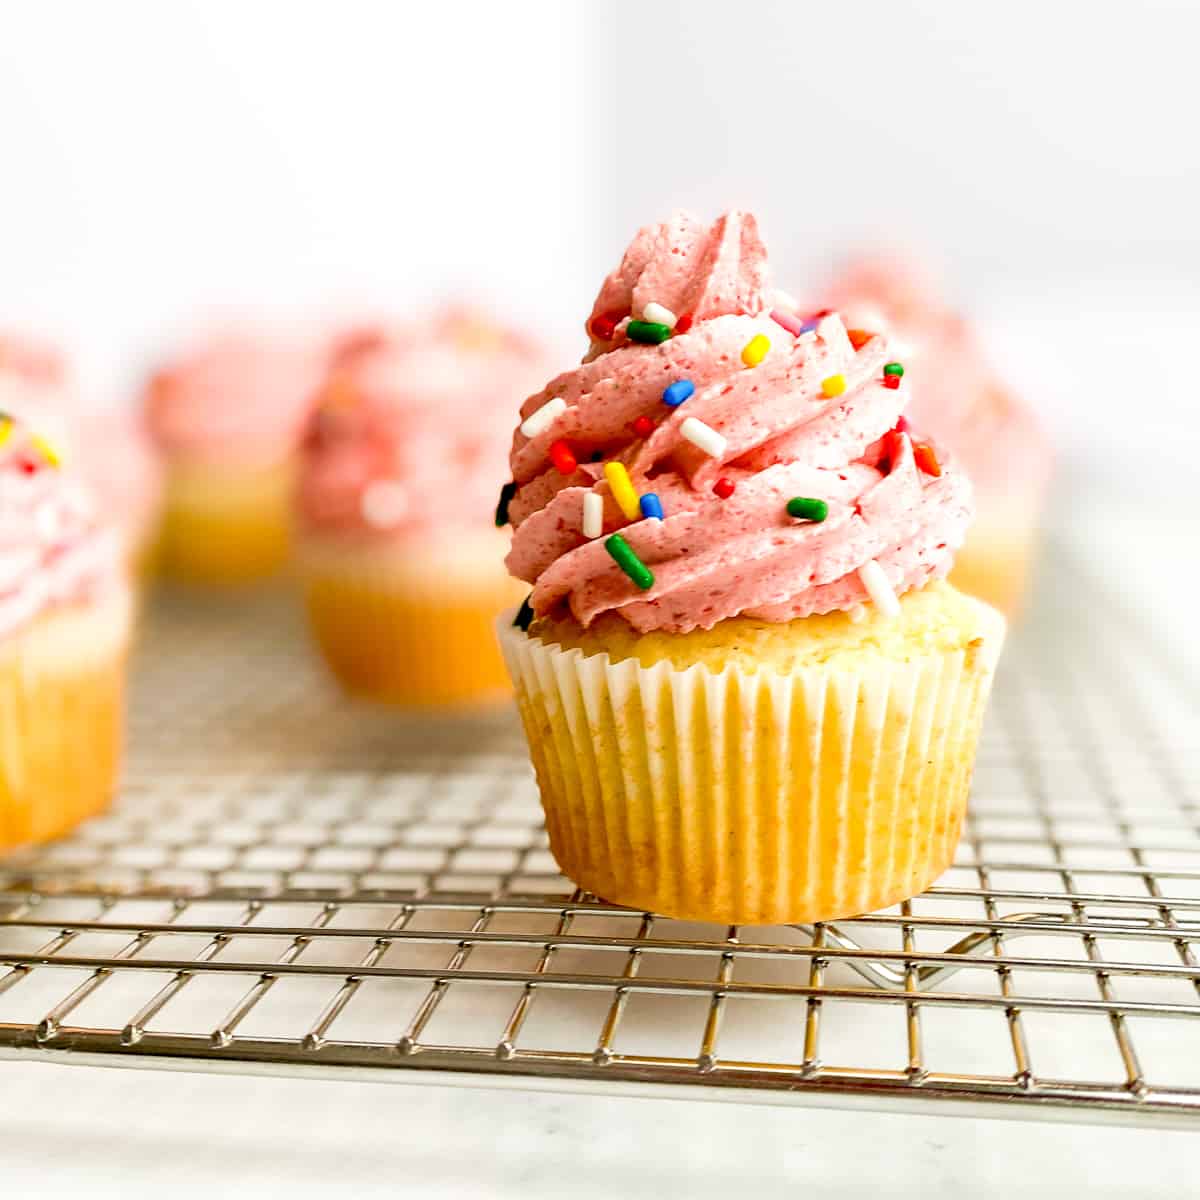 Vanilla cupcakes with strawberry frosting on a wire rack.